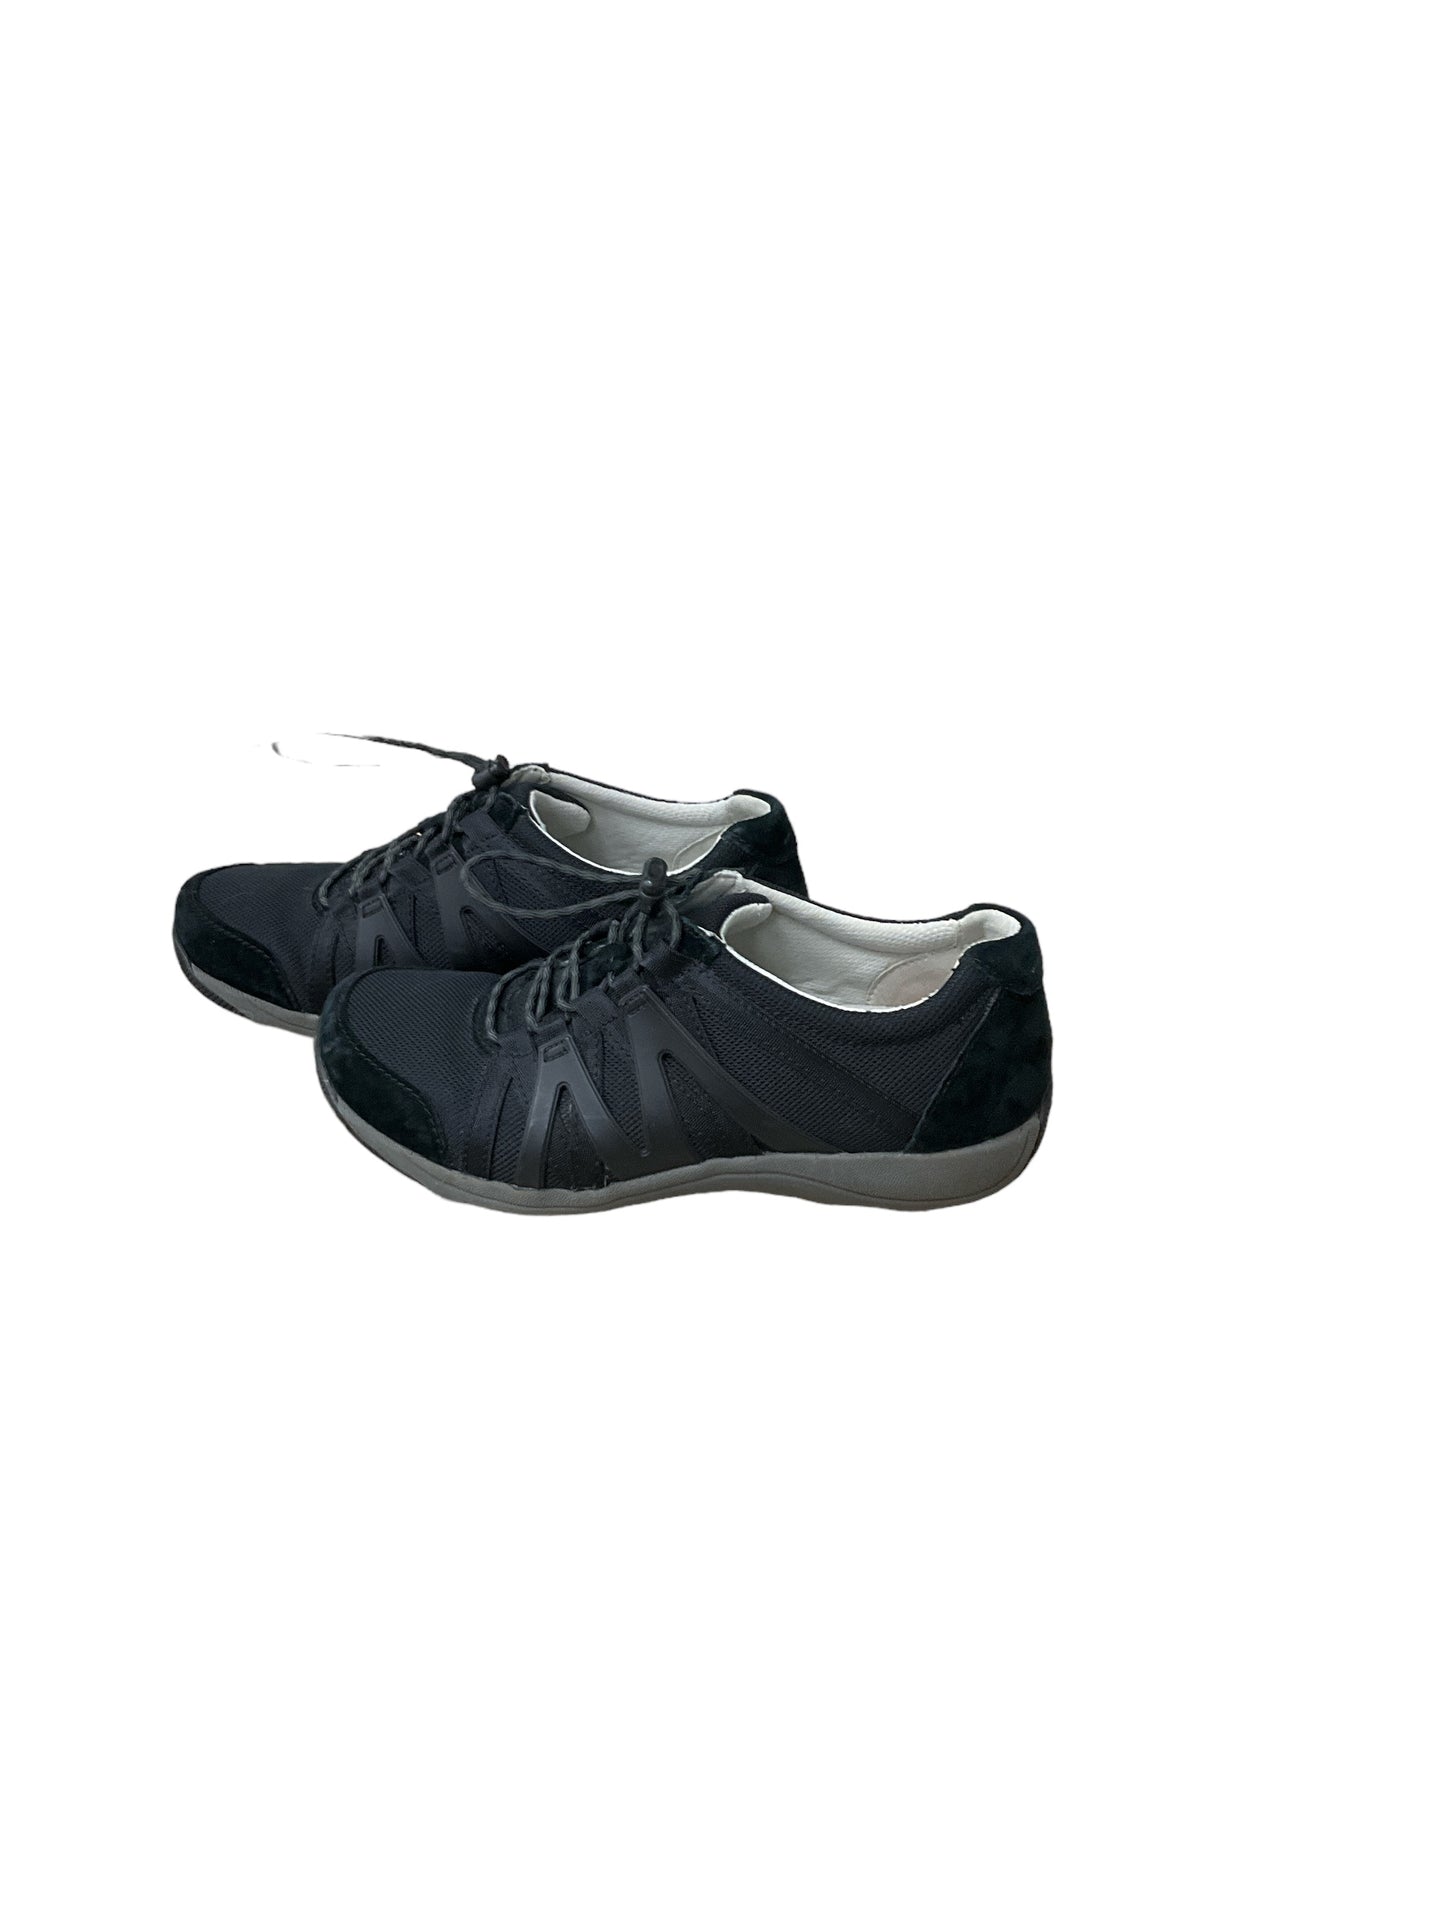 Shoes Athletic By Dansko  Size: 7